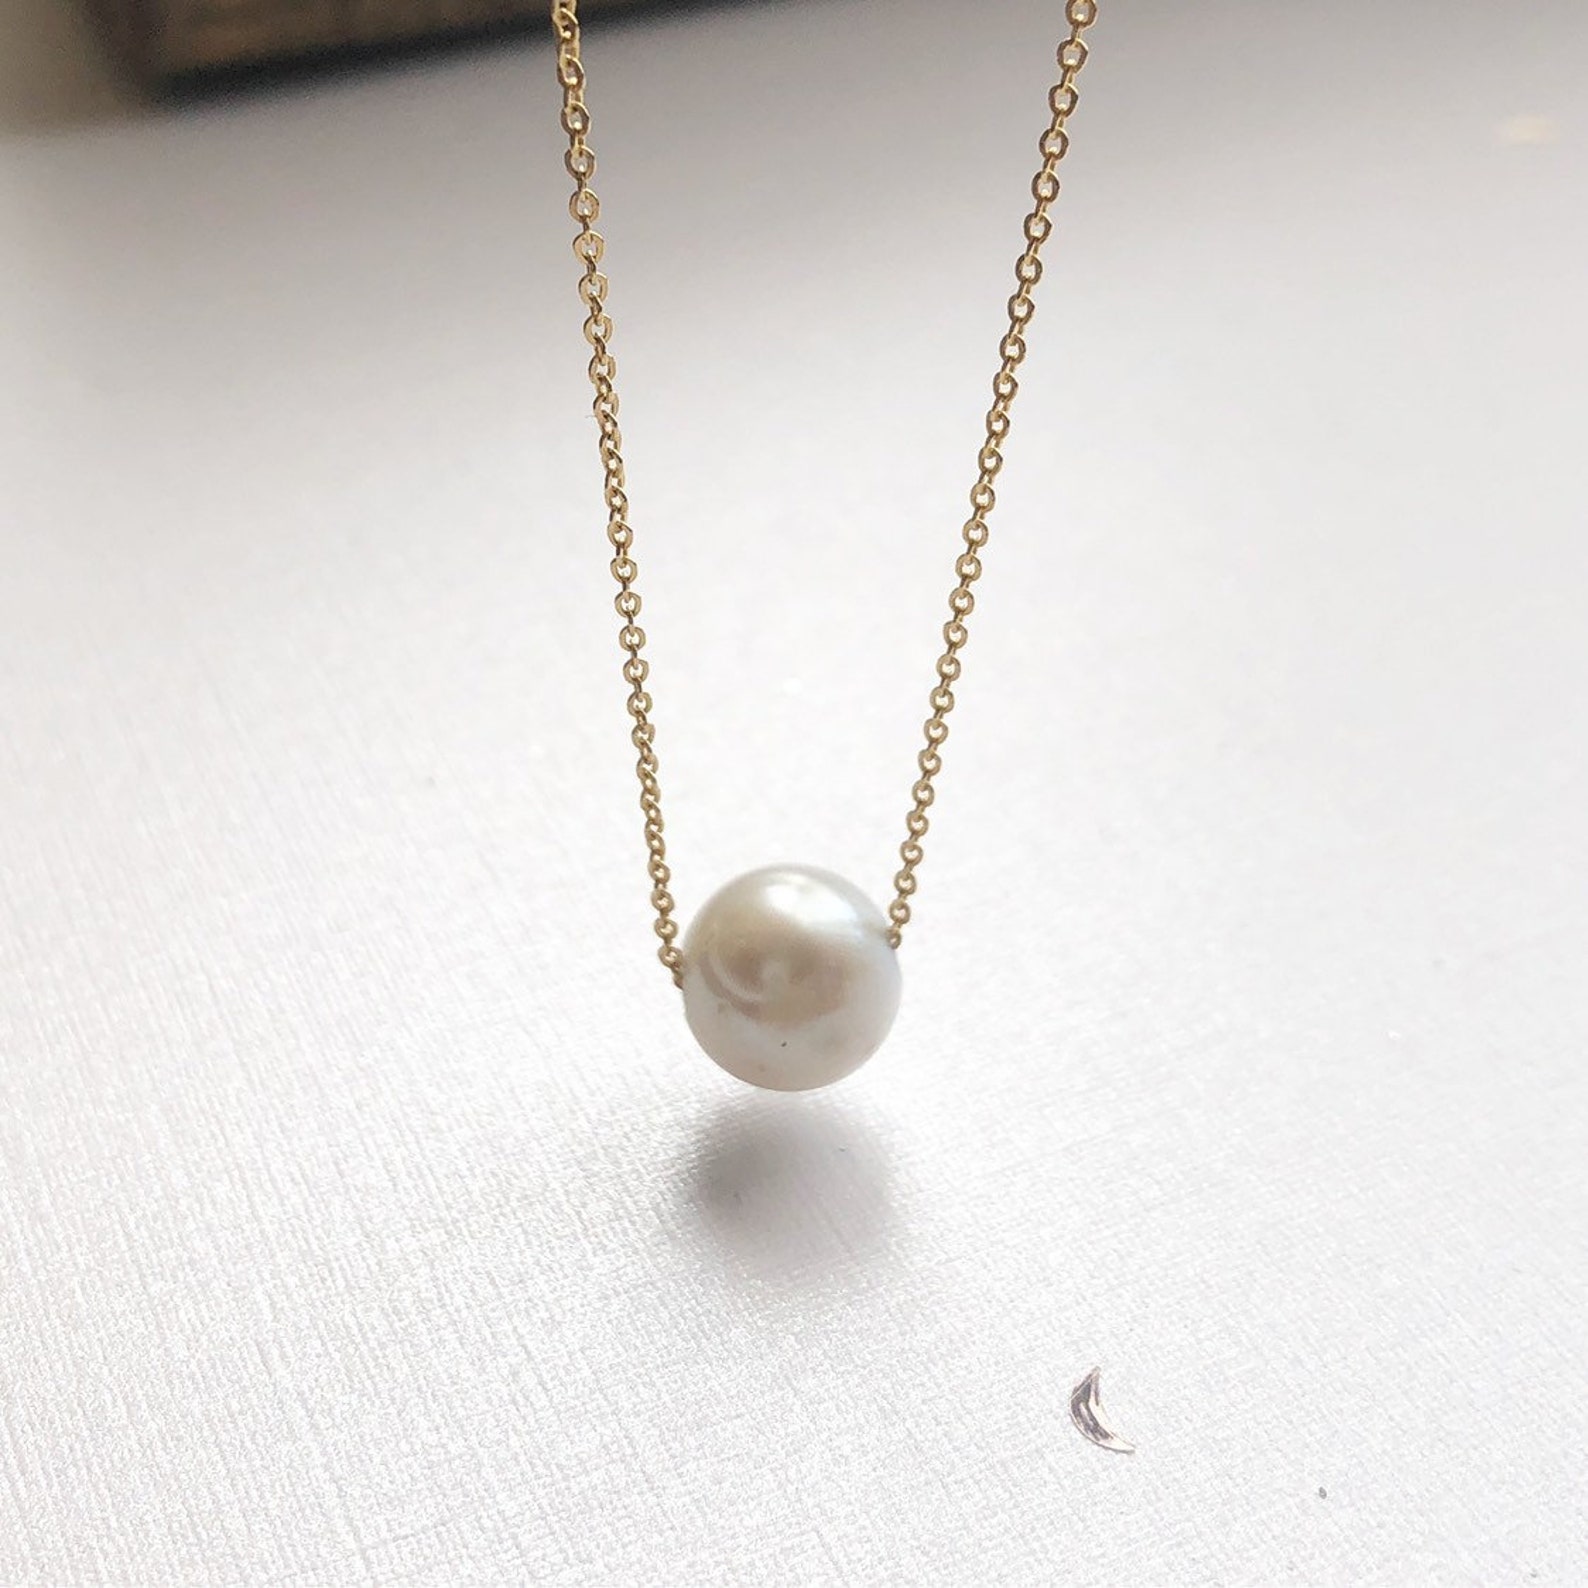 A Single Floating Pearl Necklace On Gold Filled Chain. | Etsy